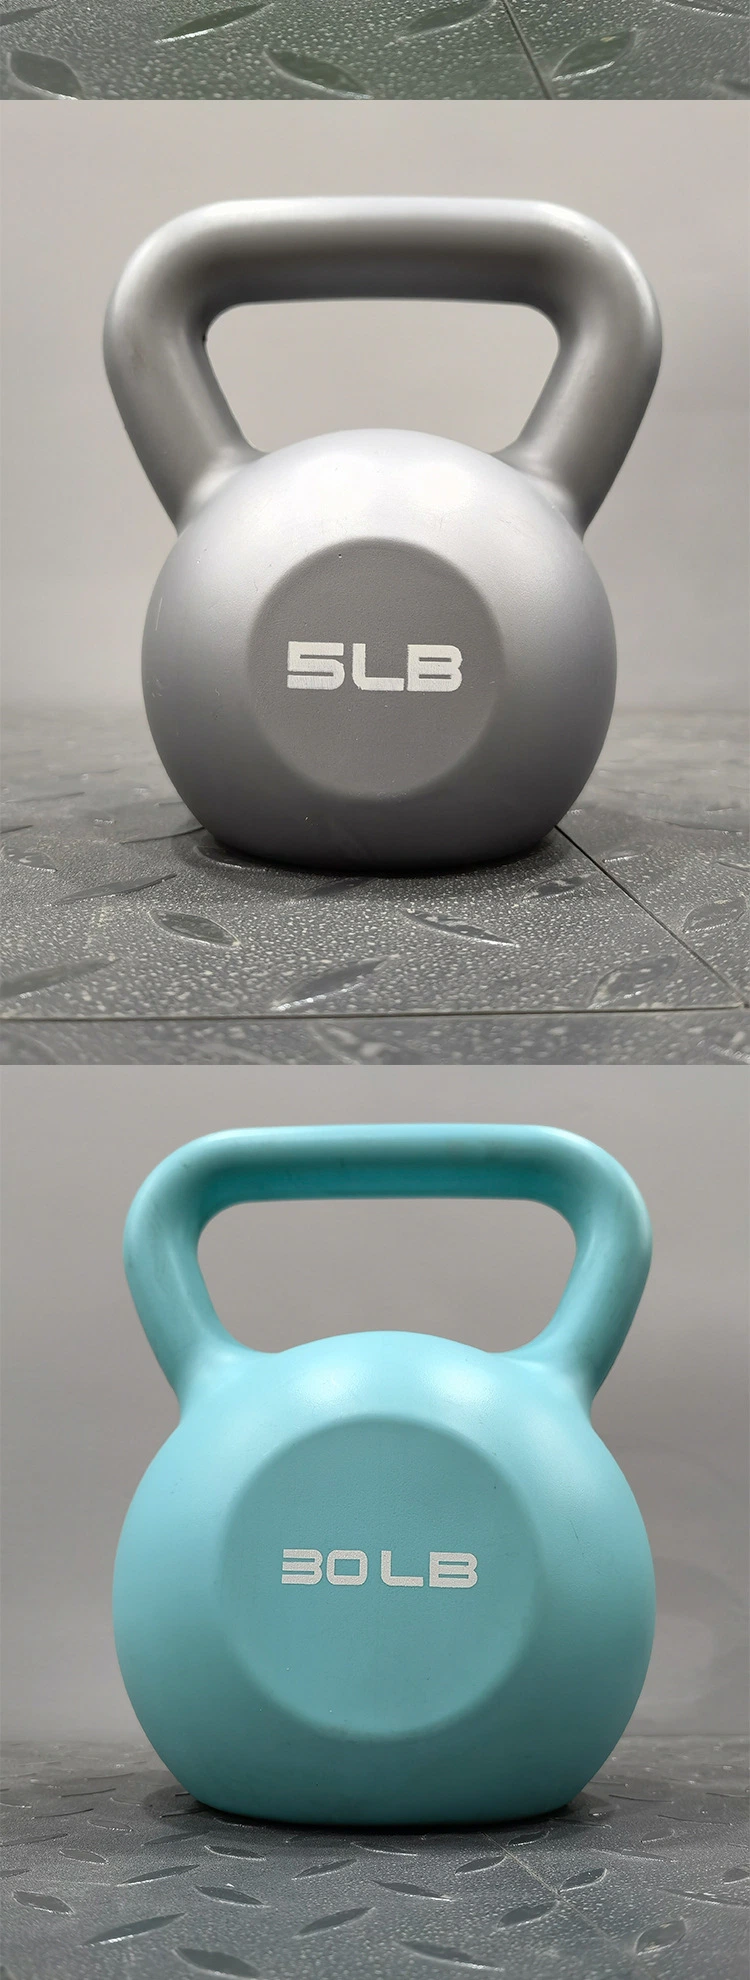 China Wholesale Cement Kettlebell Rubber Coated Competition Kettlebell Gym Kettlebell